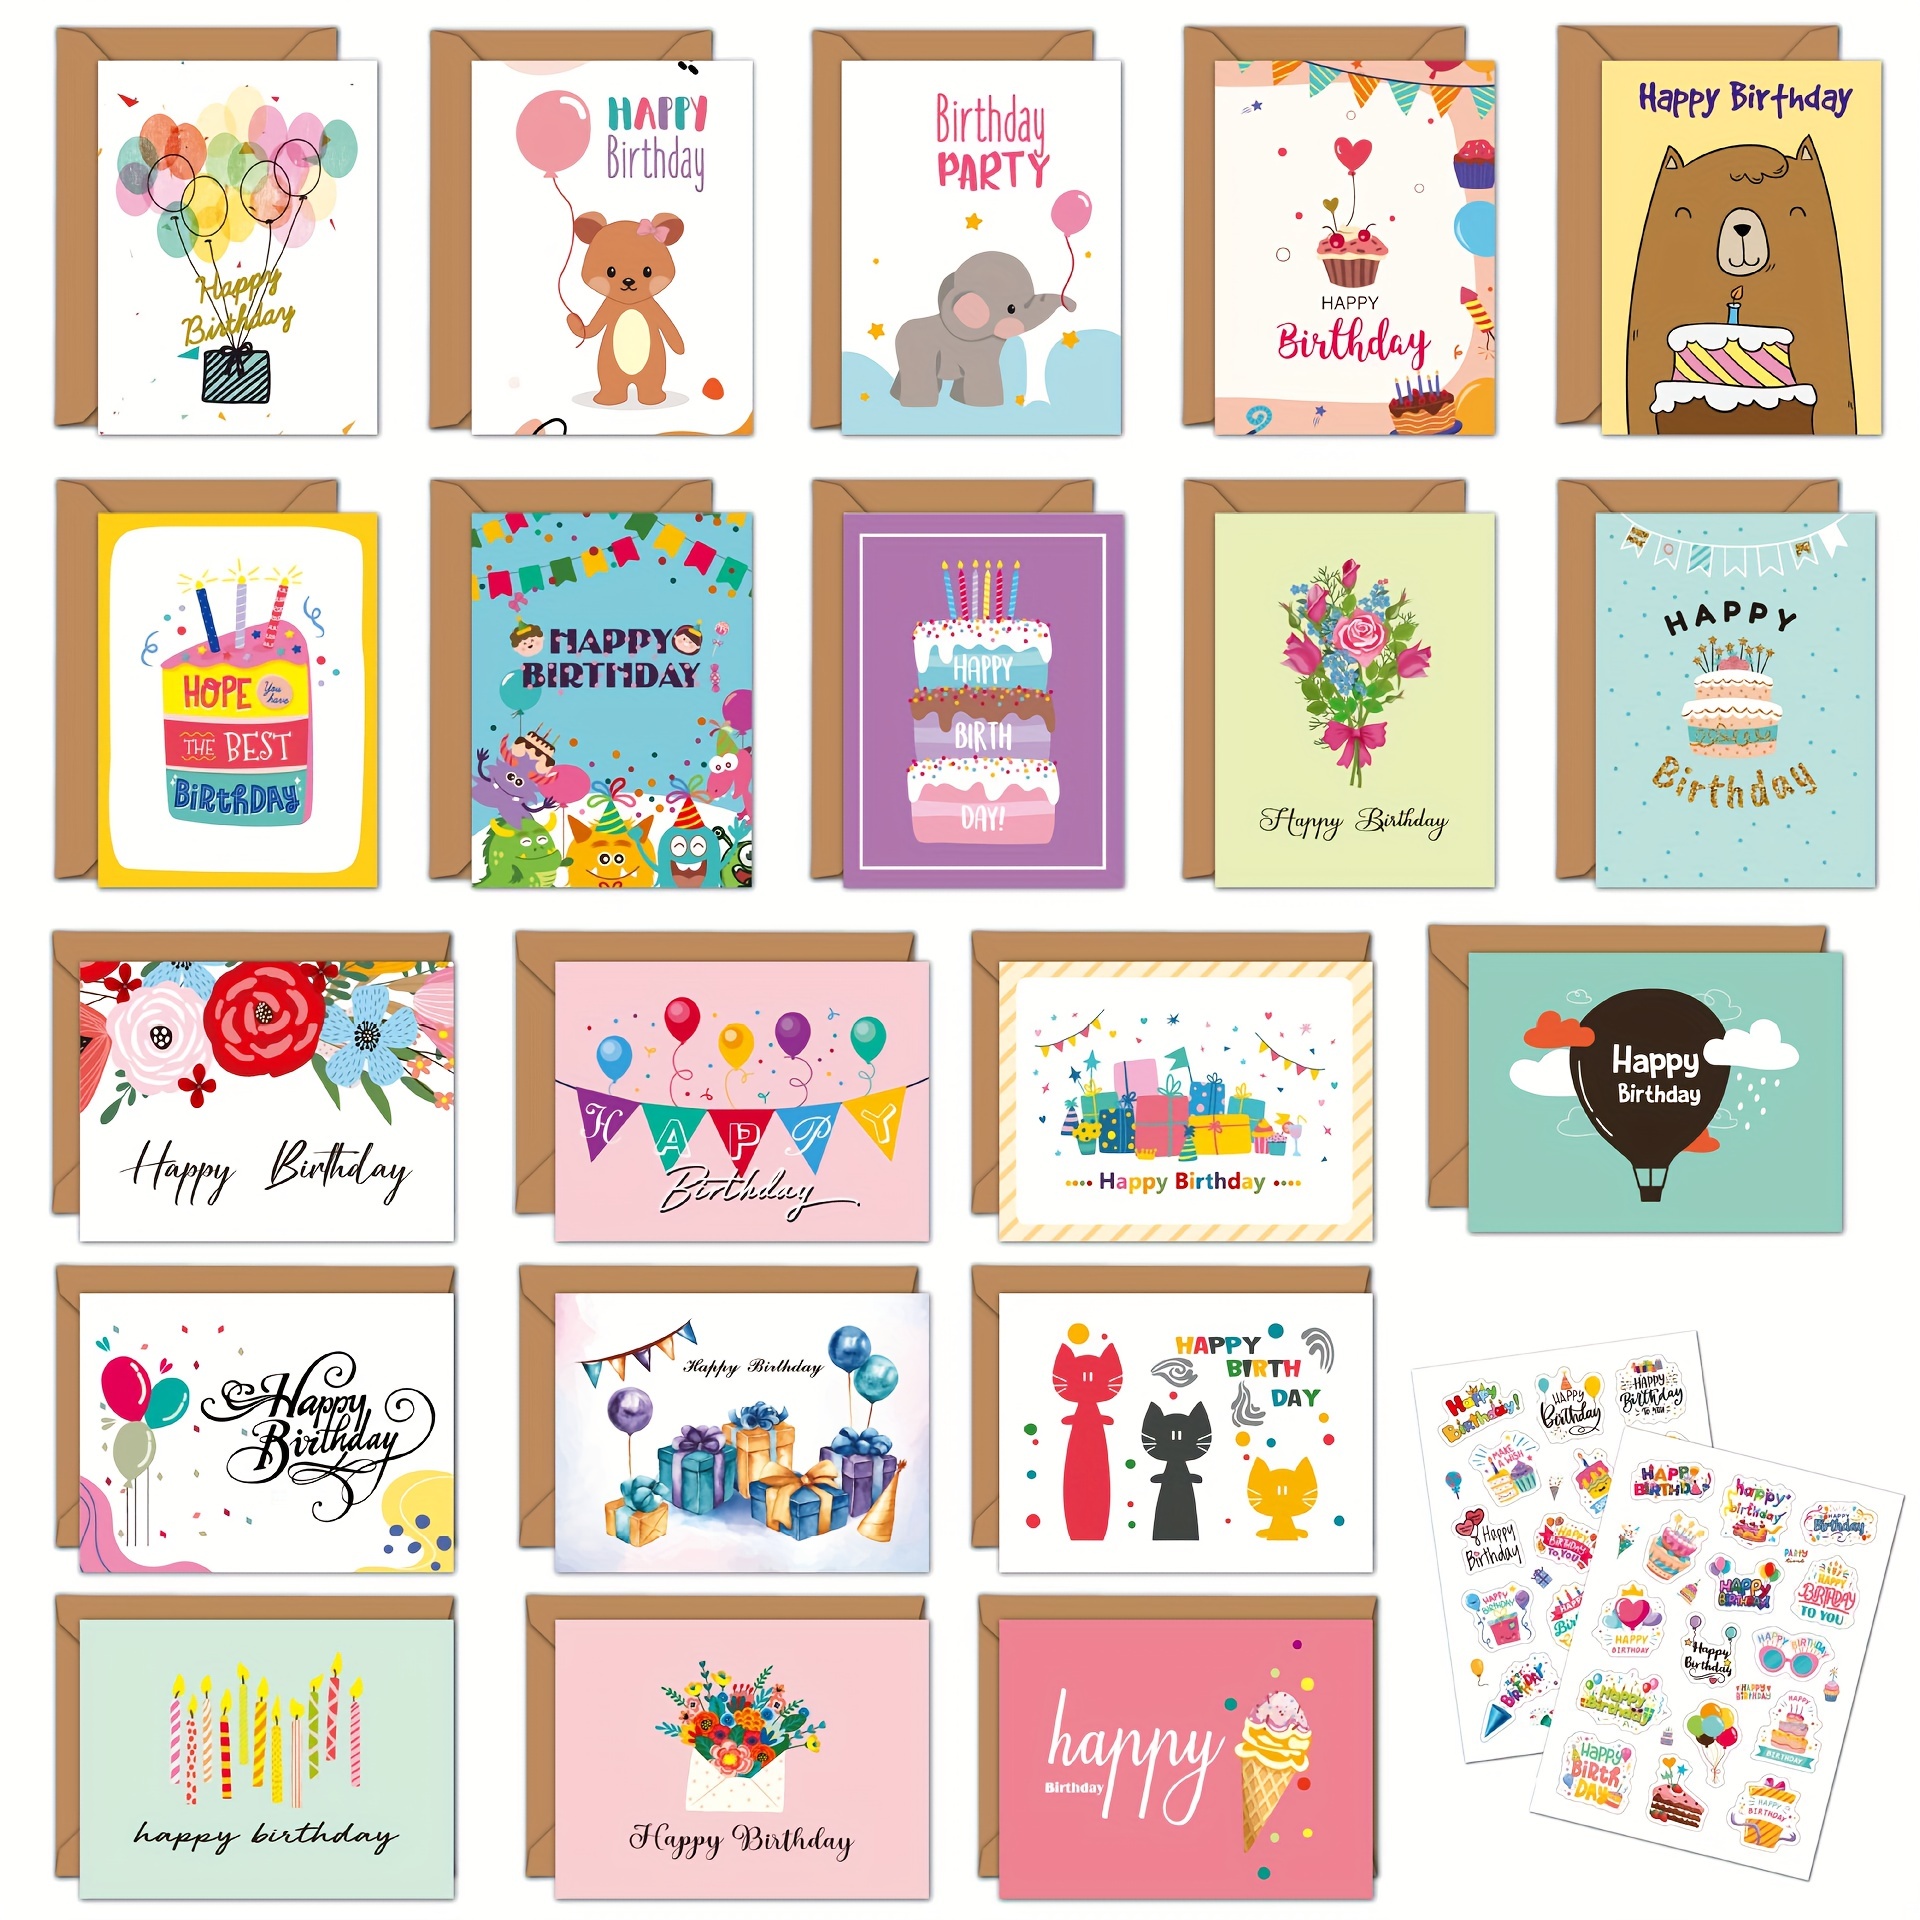 

20pcs Birthday Cards With Envelopes & Stickers Blank Happy Birthday Cards Assortment In Bulk For Family, Friends, Work & Office Celebrations